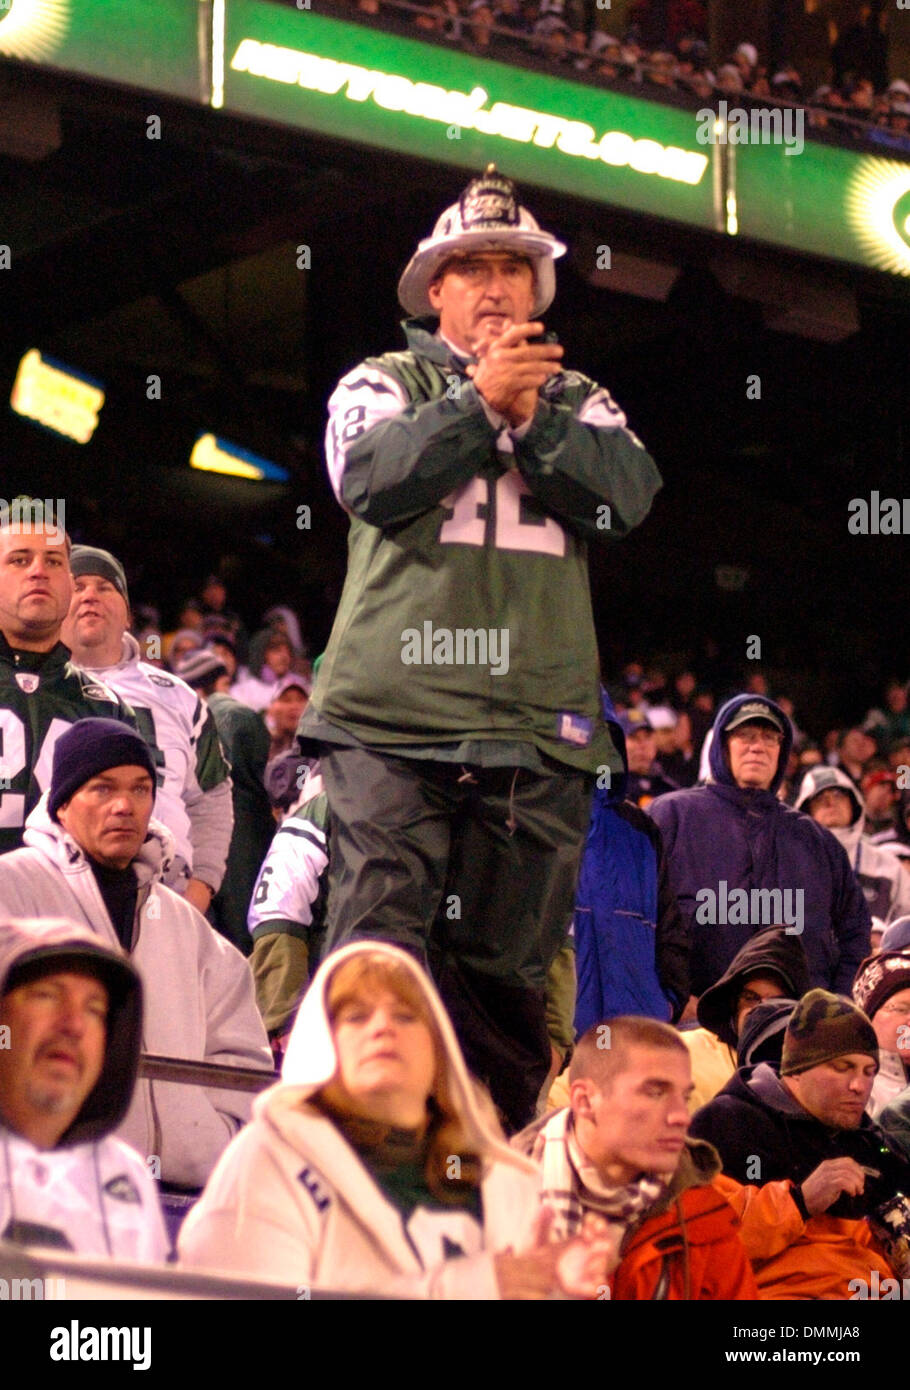 18 October  2009: New York Jets fans get into the spirit of the game at Giant Stadium in the Meadowlands, NJ.The Bills defeated the Jets 16-13 in overtime..Mandatory Credit - Bennett Cohen / Southcreek Global Media. (Credit Image: © Southcreek Global/ZUMApress.com) Stock Photo